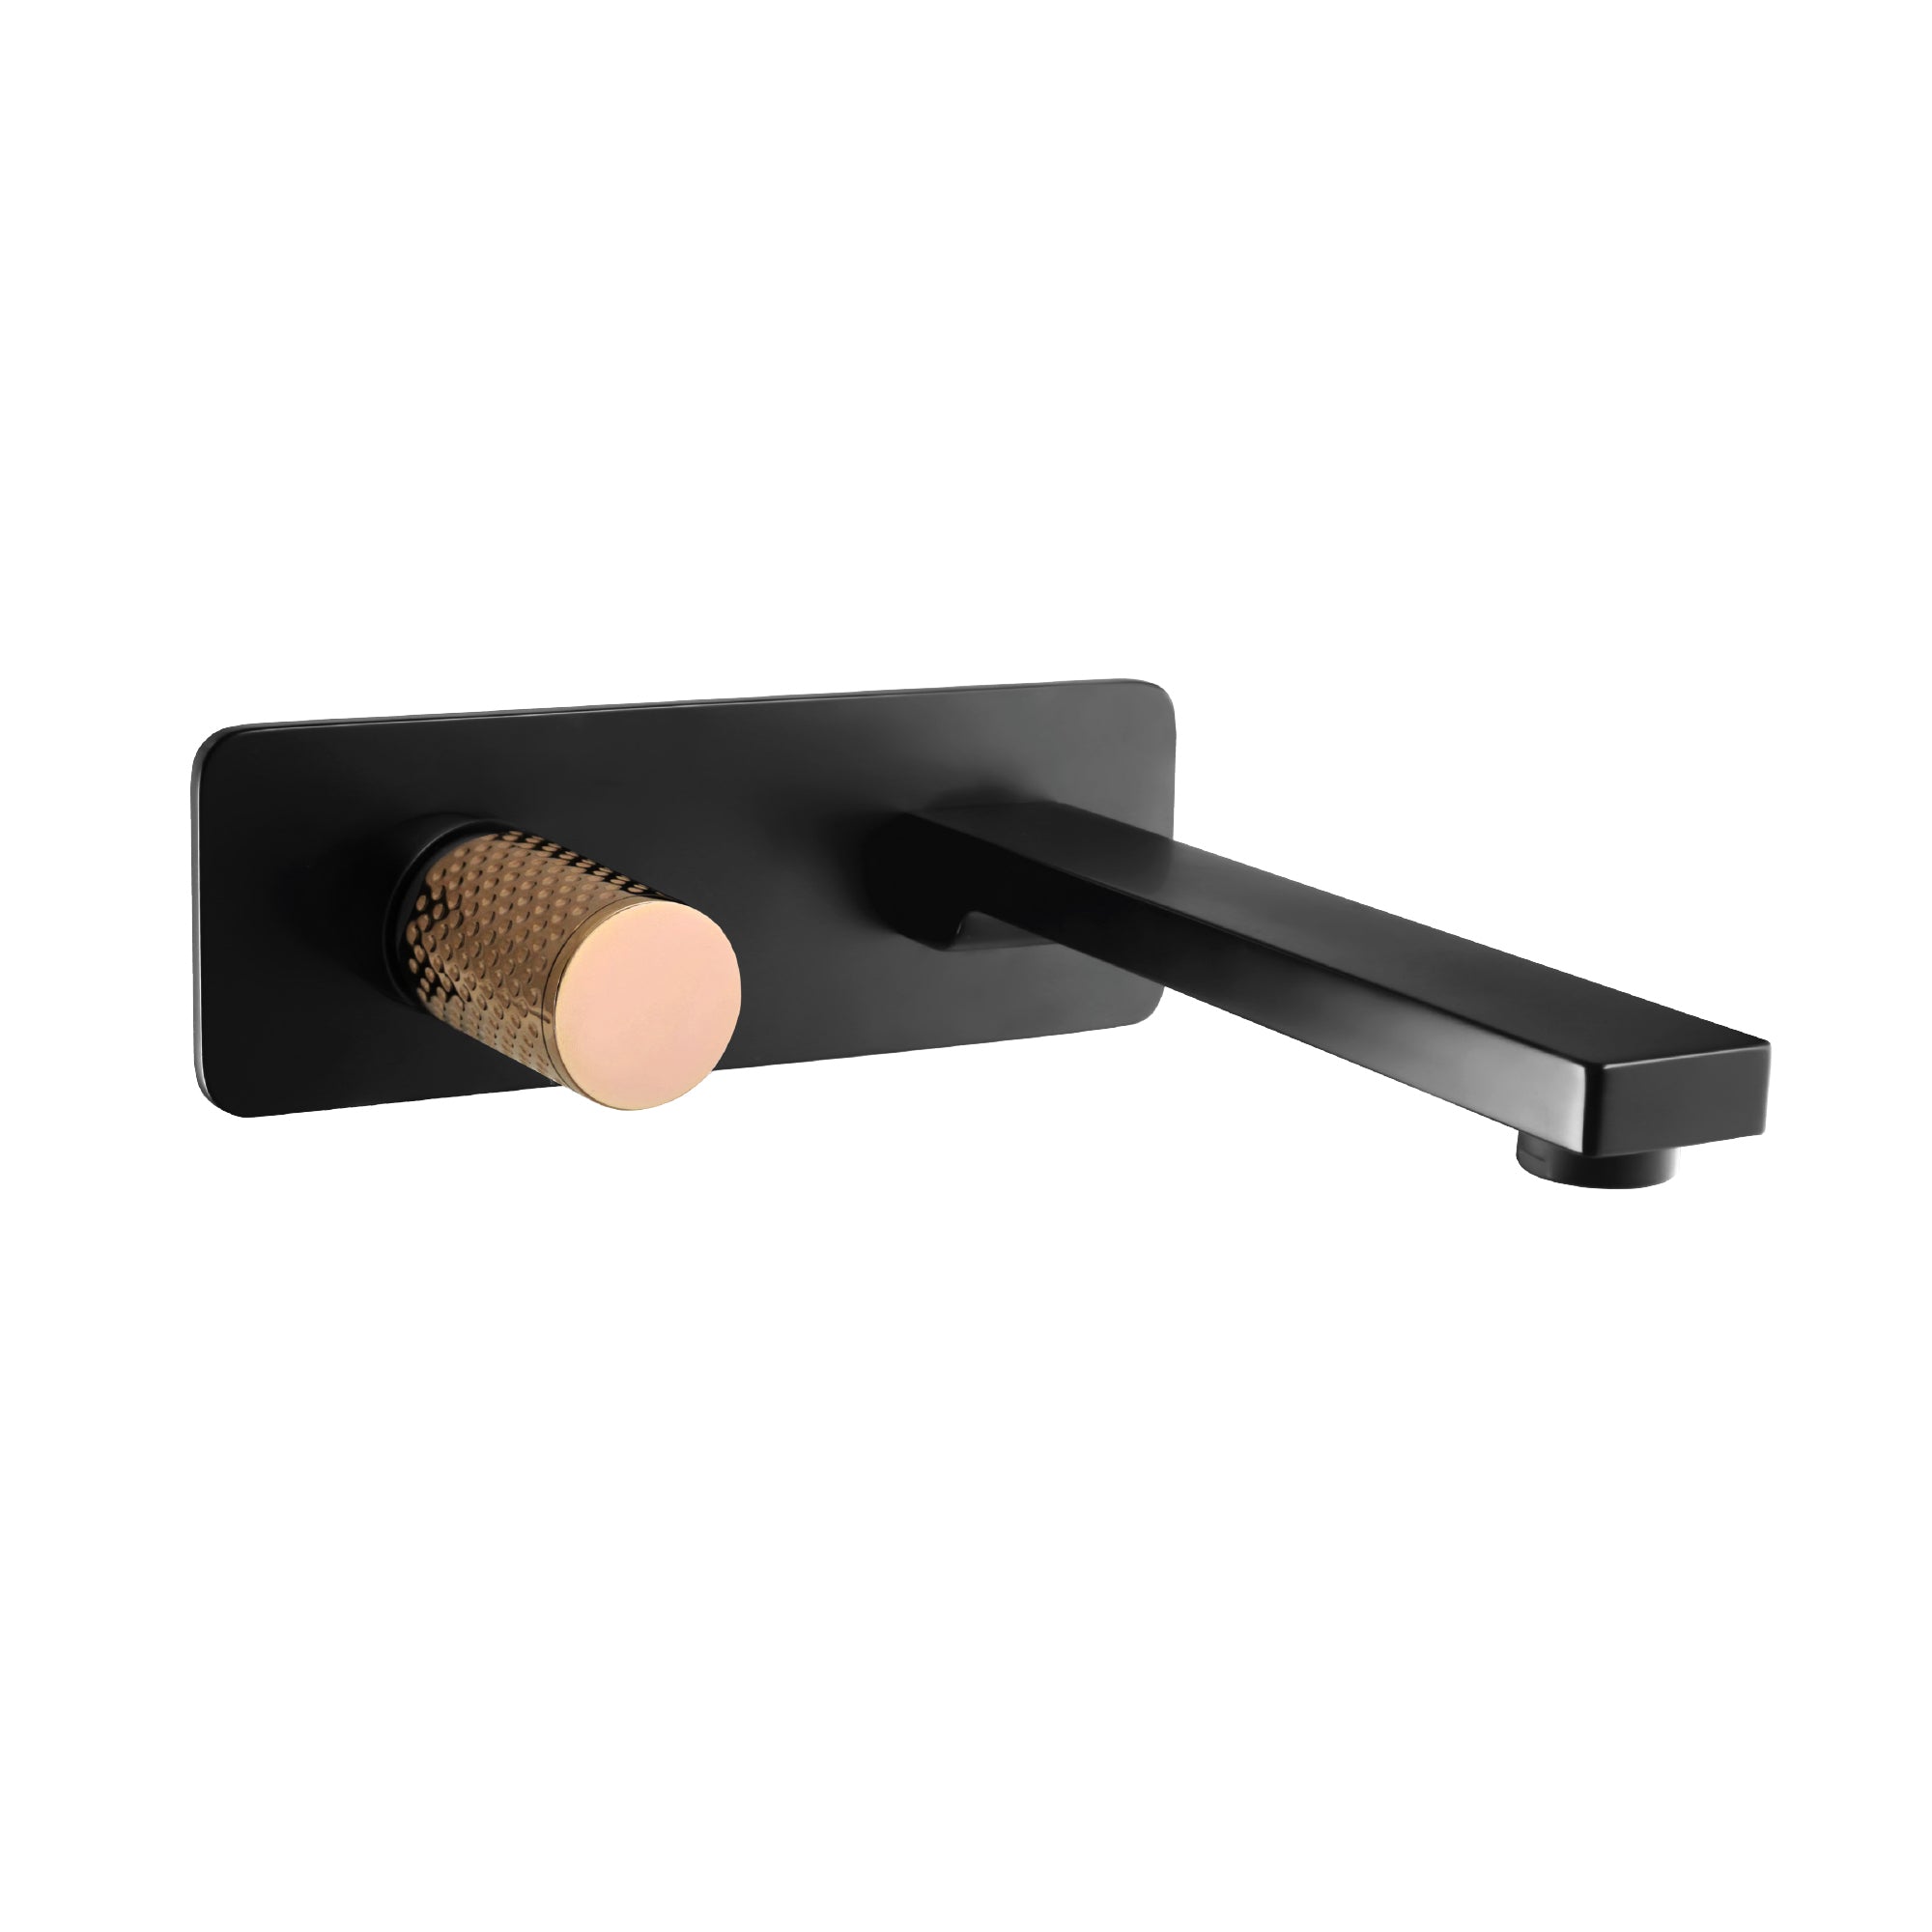 LINKWARE GABE WALL OUTLET MIXER MATTE BLACK AND ROSE GOLD